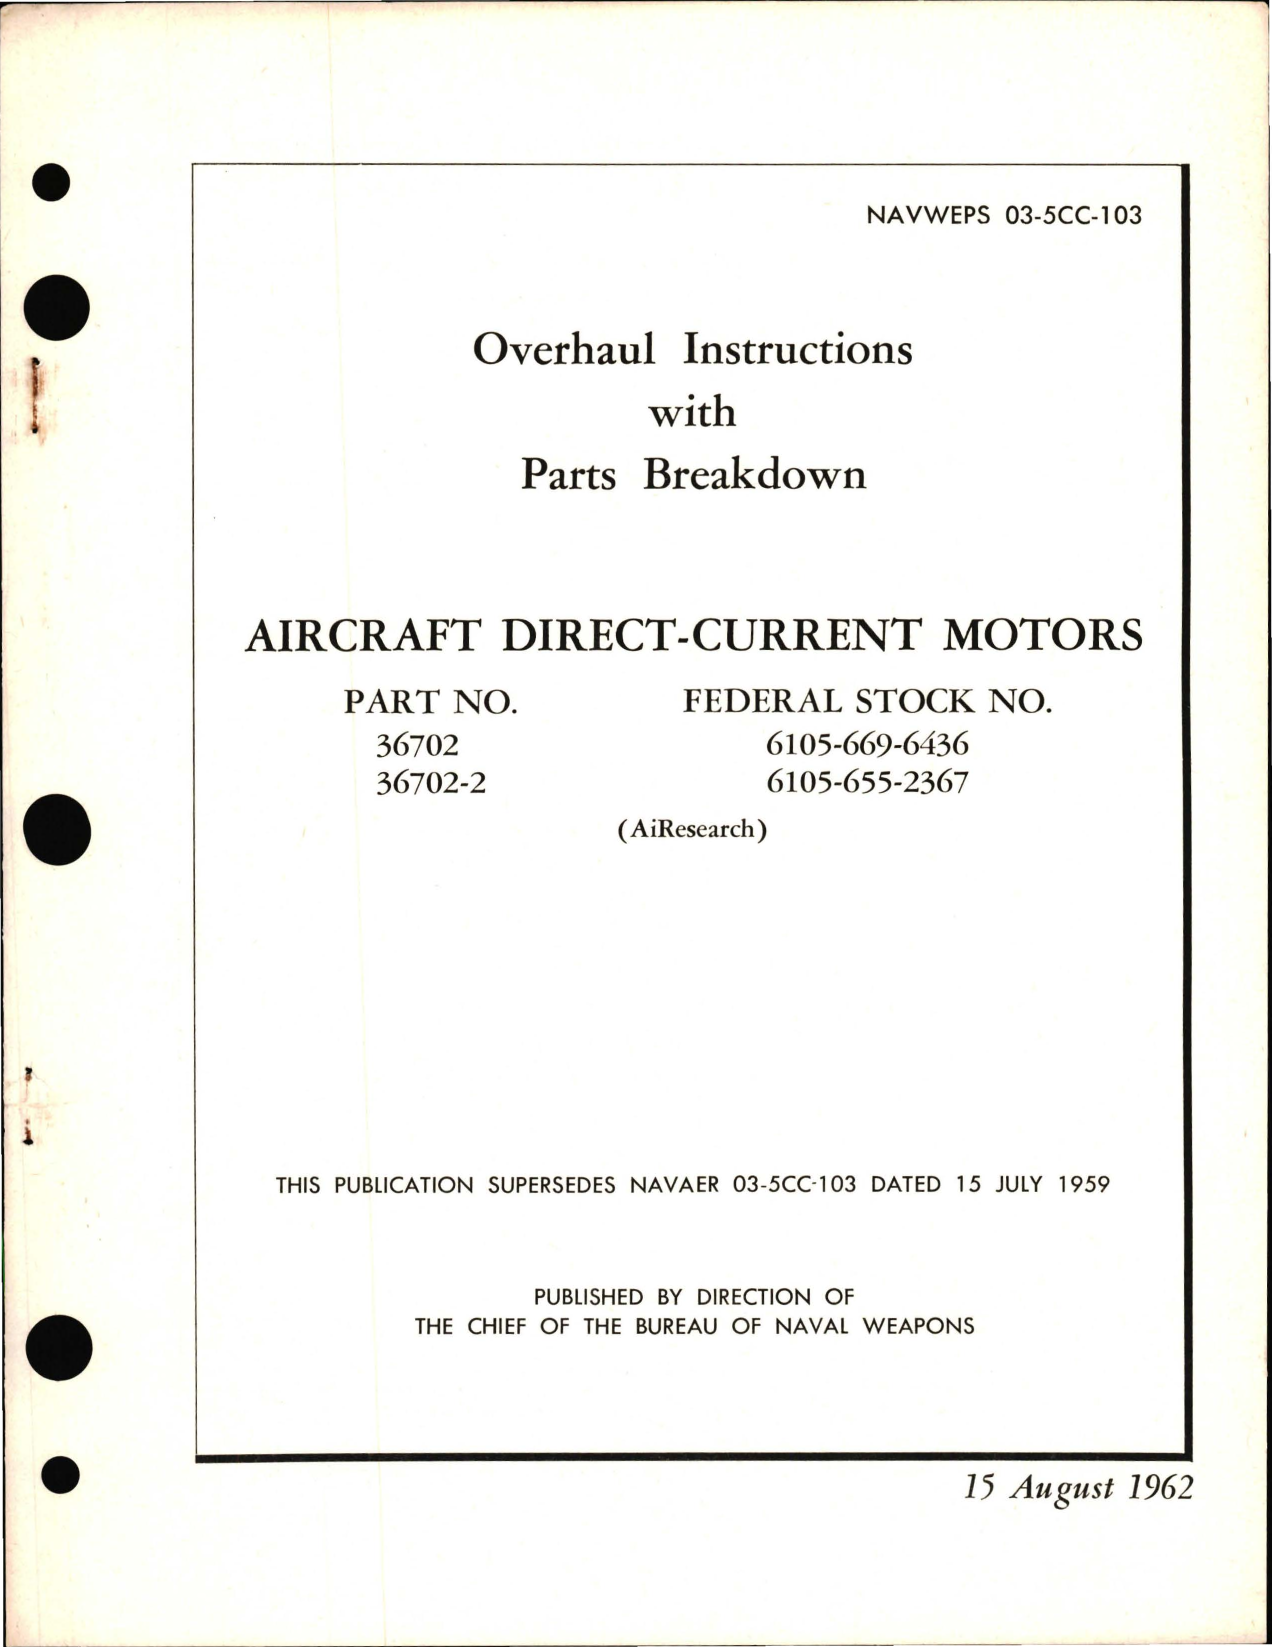 Sample page 1 from AirCorps Library document: Overhaul Instructions with Parts Breakdown for Aircraft Direct Current Motors - Part 36702 and 36702-2 